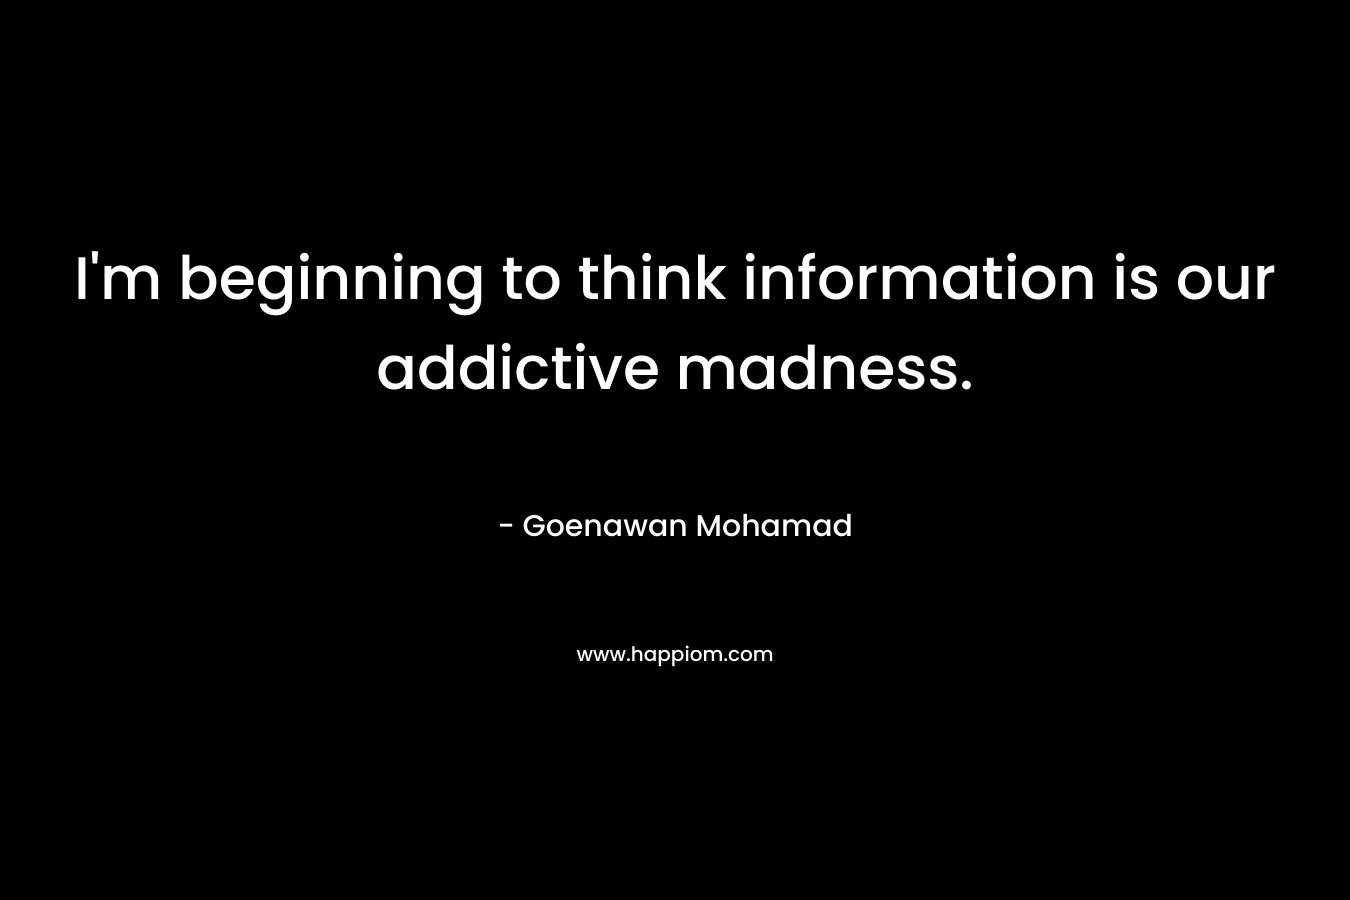 I’m beginning to think information is our addictive madness. – Goenawan Mohamad